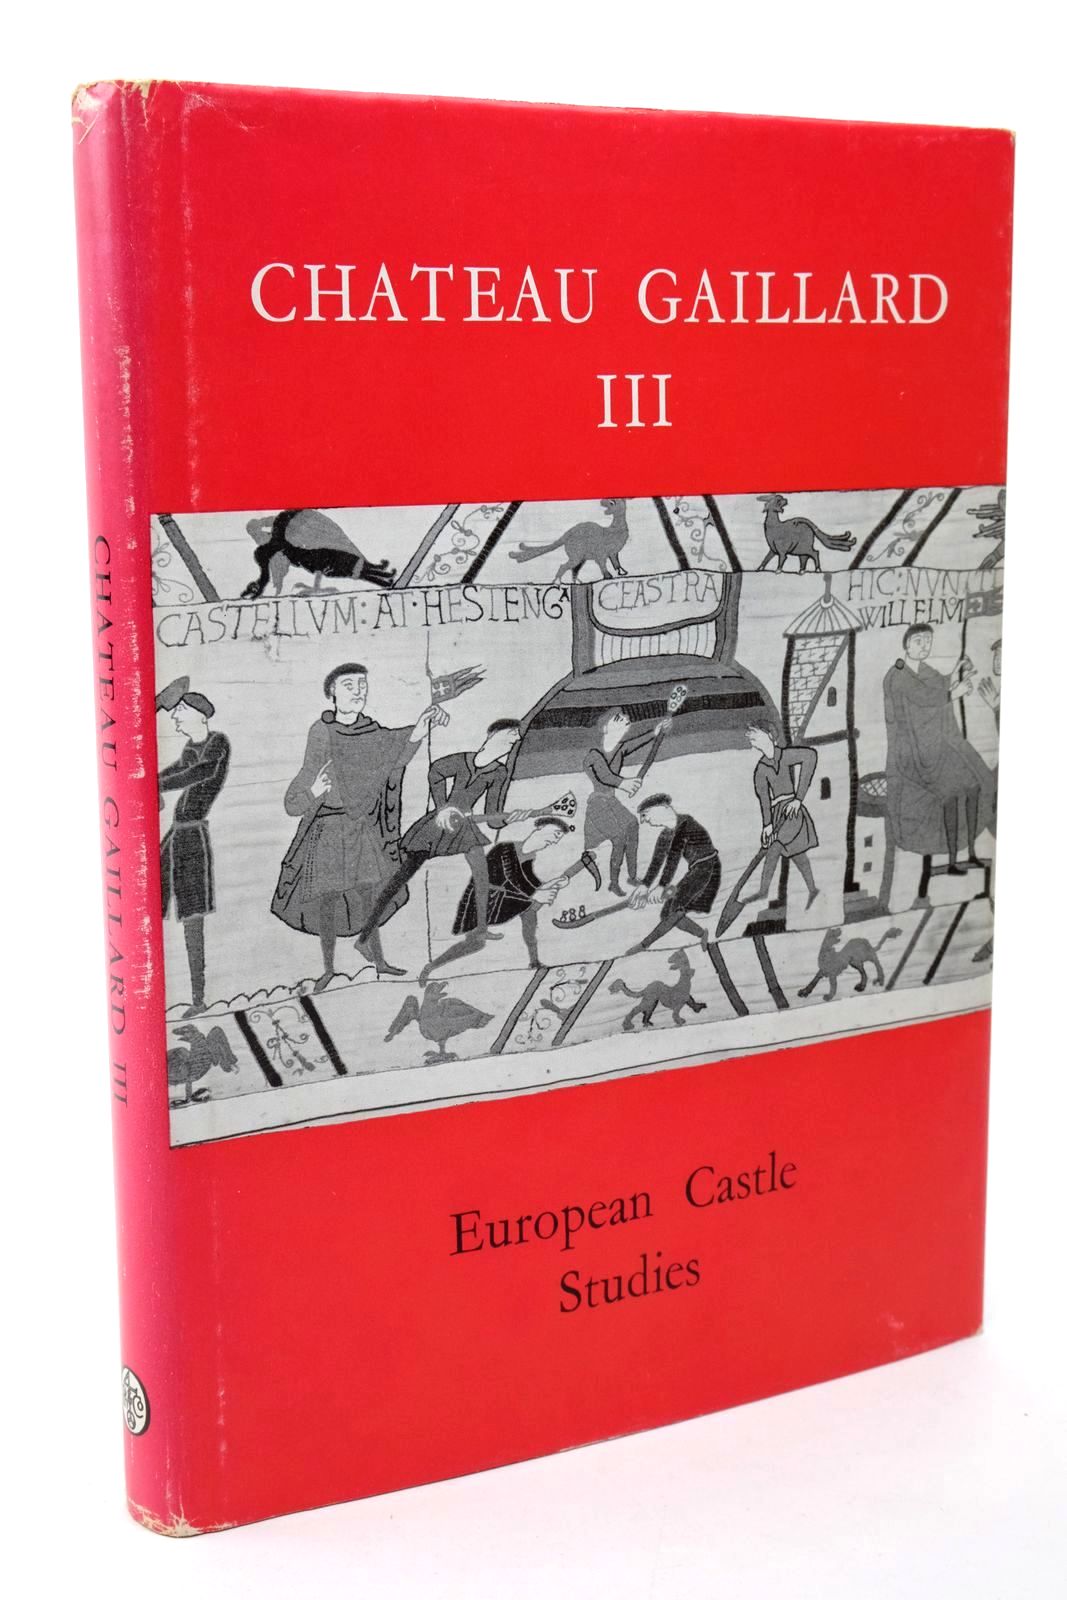 Photo of CHATEAU GAILLARD III - EUROPEAN CASTLE STUDIES written by Taylor, A.J. published by Phillimore & Co. Ltd. (STOCK CODE: 1322586)  for sale by Stella & Rose's Books